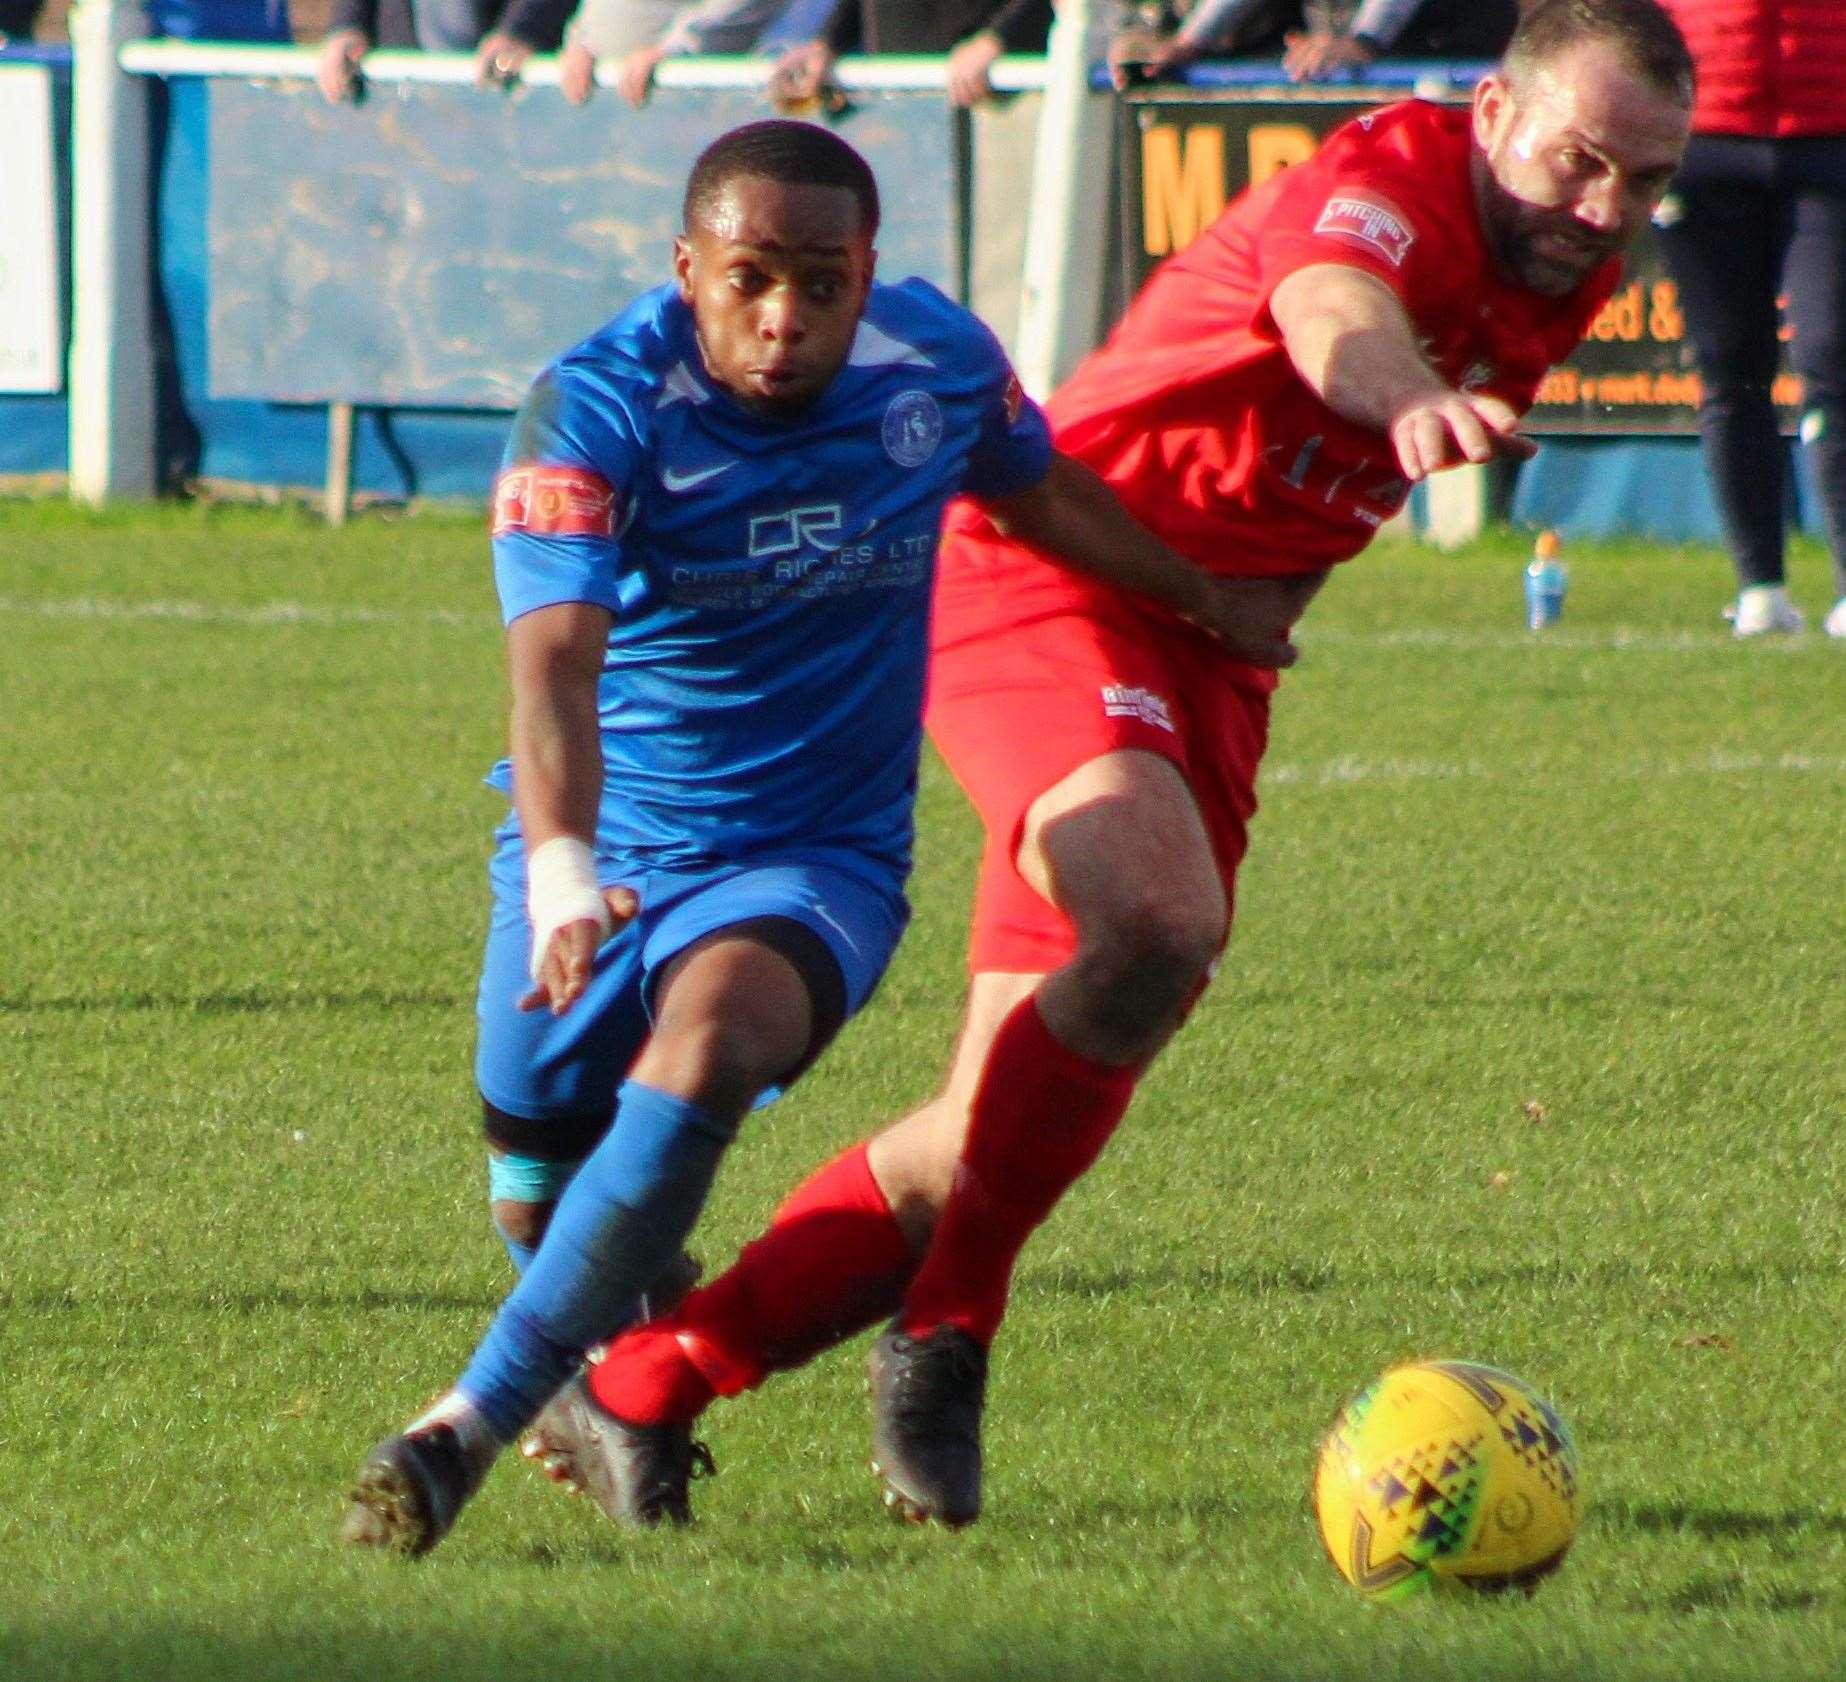 Herne Bay winger Kieron Campbell scored once and was a thorn in Haywards Heath's side throughout on Tuesday. Picture: Keith Davy